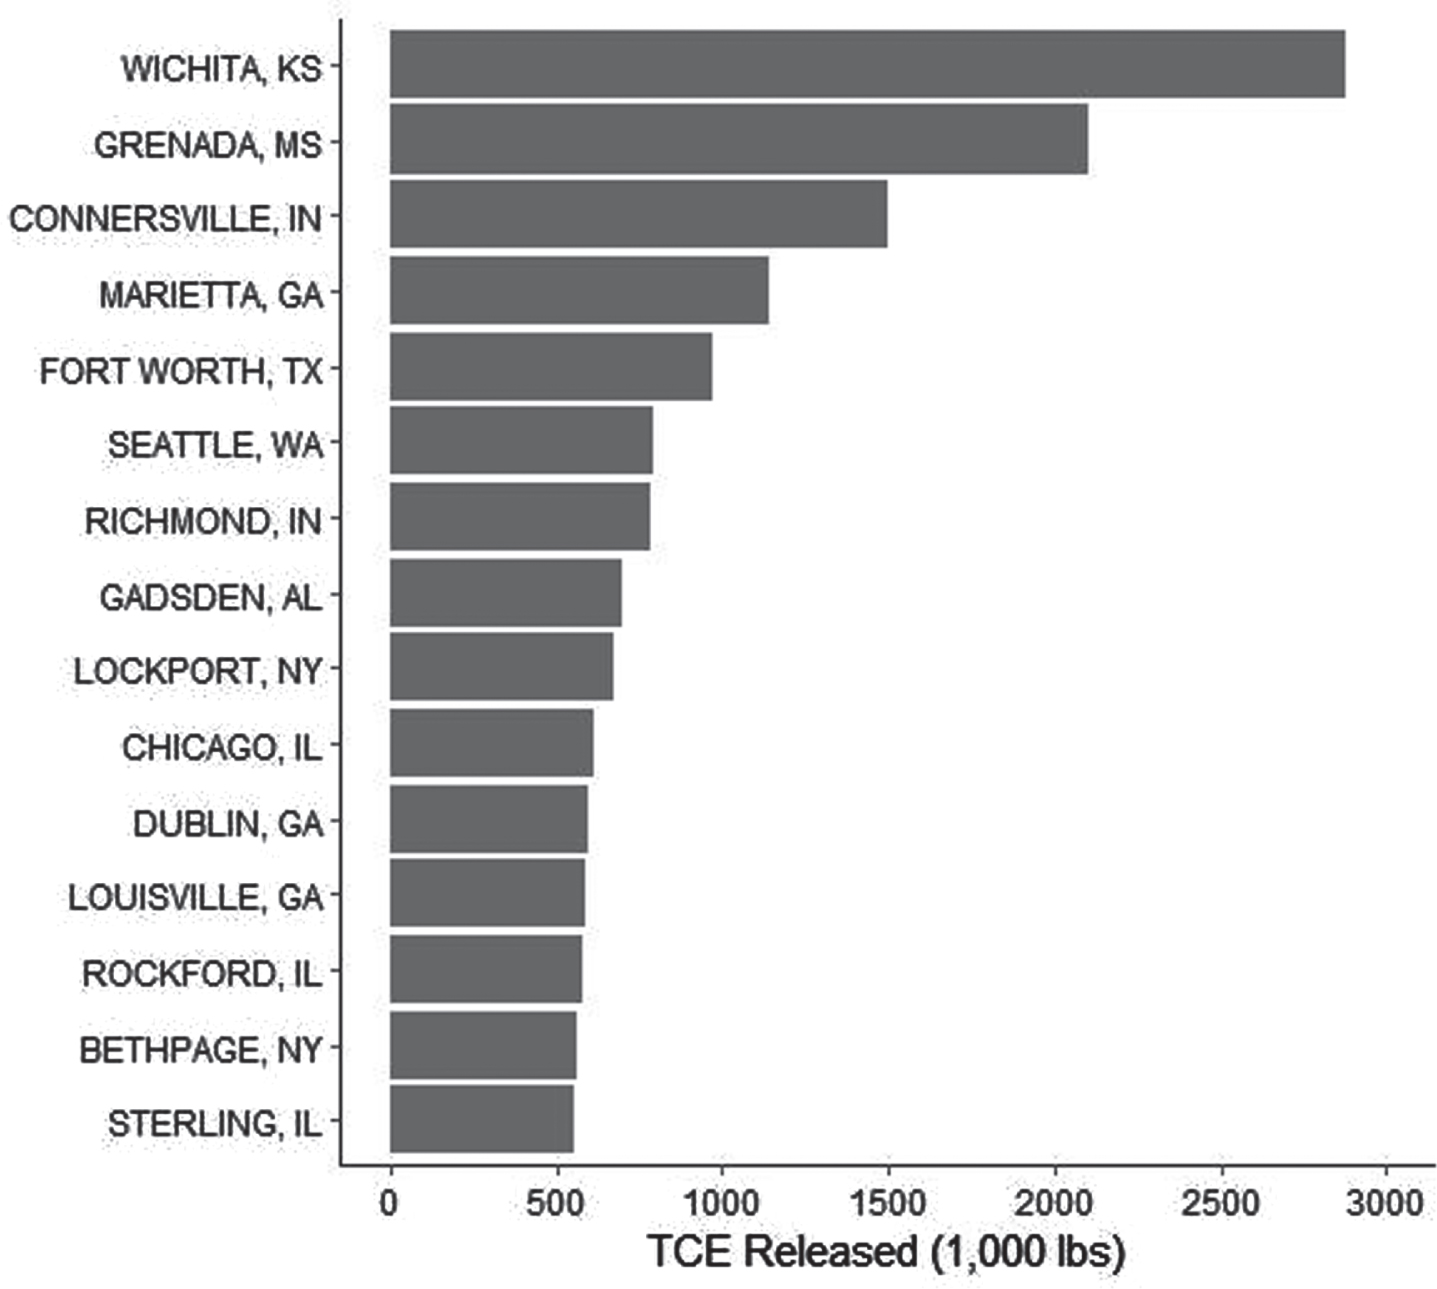 U.S. cities that released the most TCE into the air, 1987 [35].